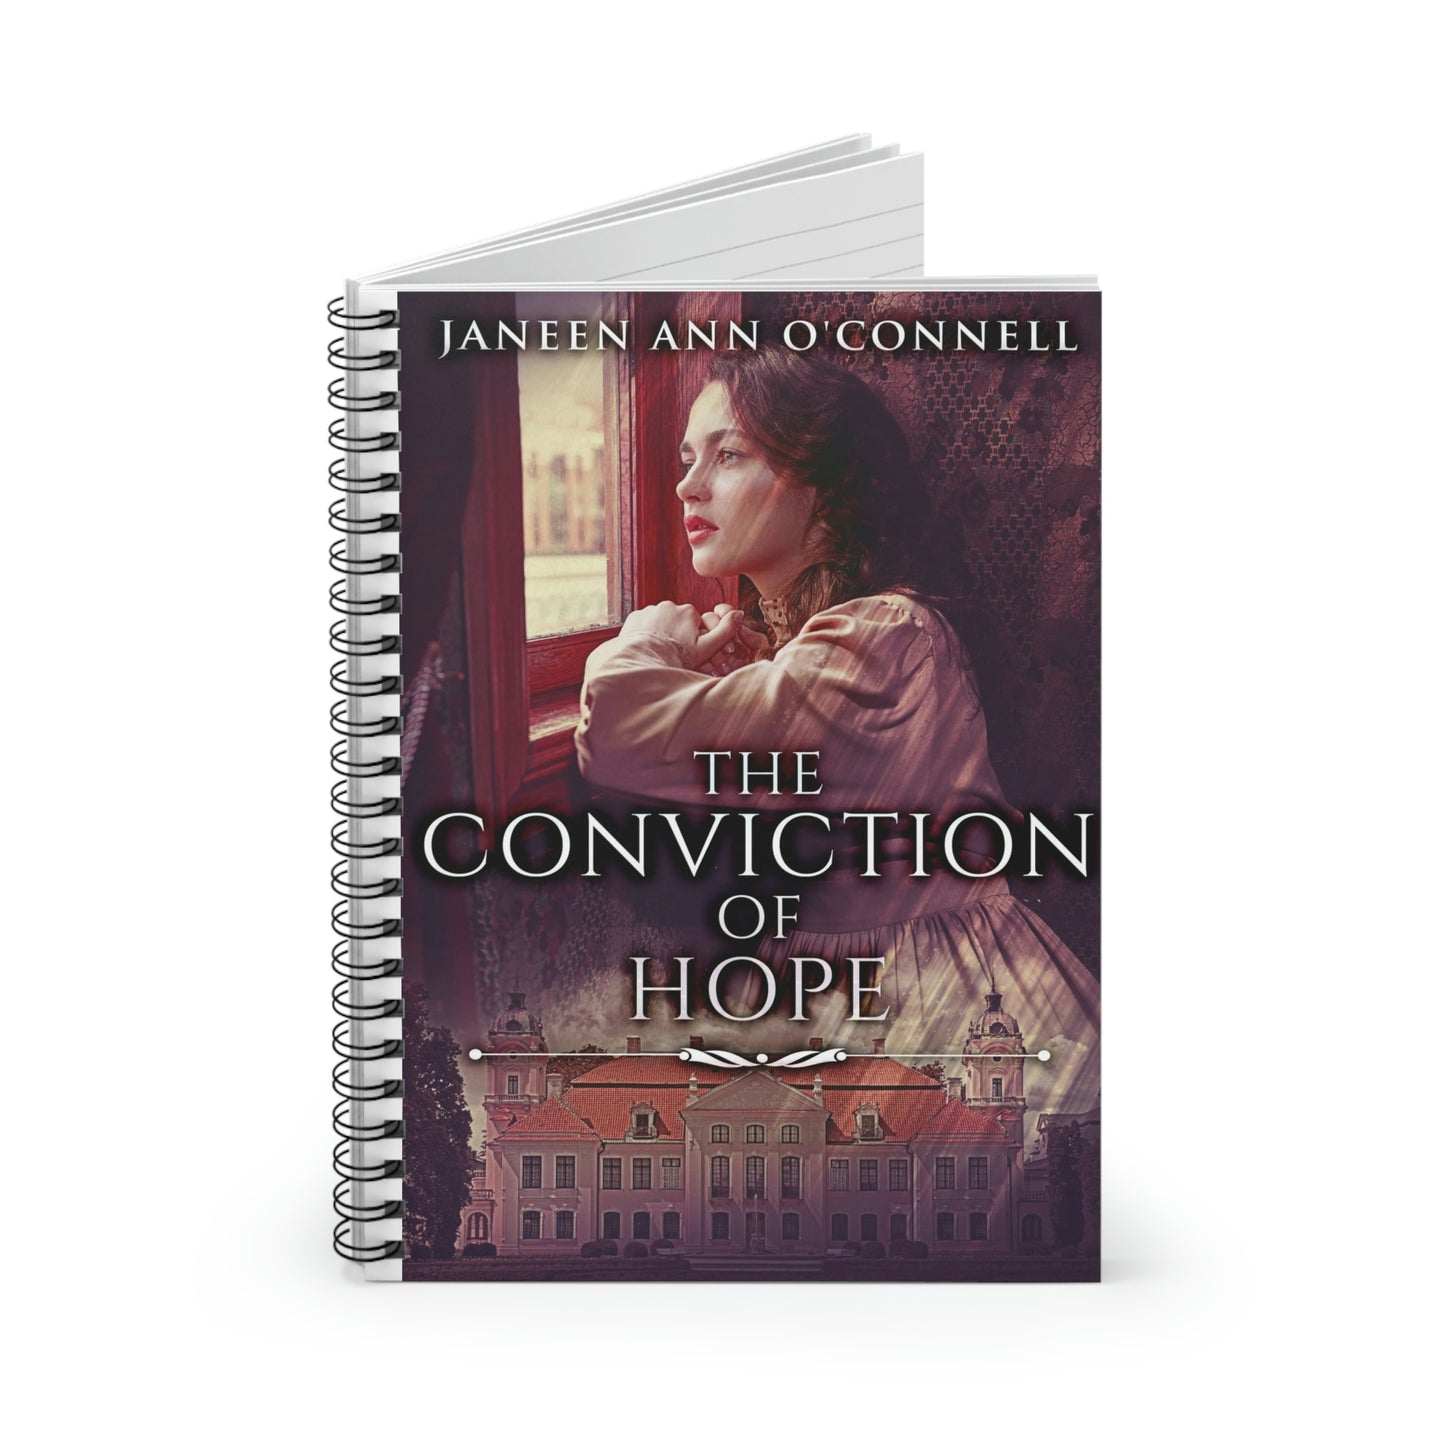 The Conviction Of Hope - Spiral Notebook